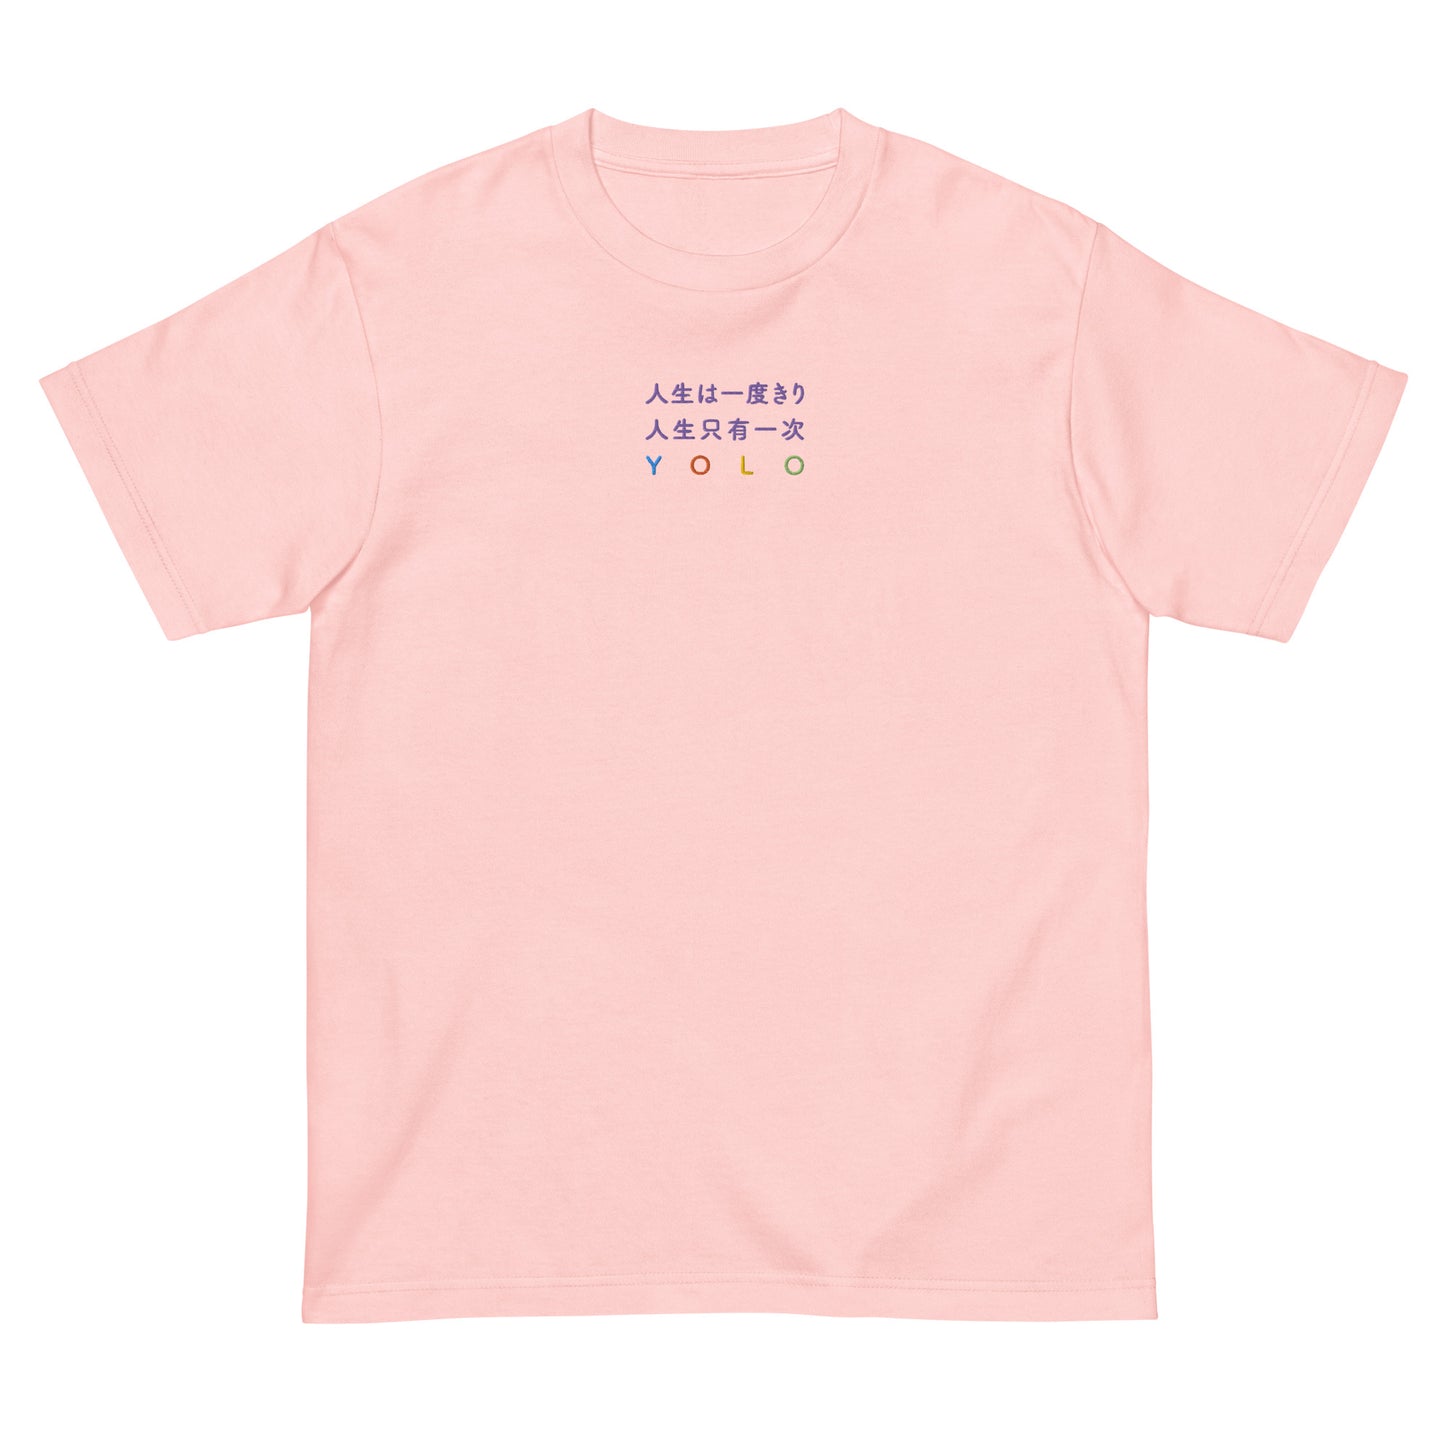 Pink High Quality Tee - Front Design with an Purple, Light Blue, Orange, Yellow, Light Green Embroidery "YOLO" in Japanese,Chinese and English